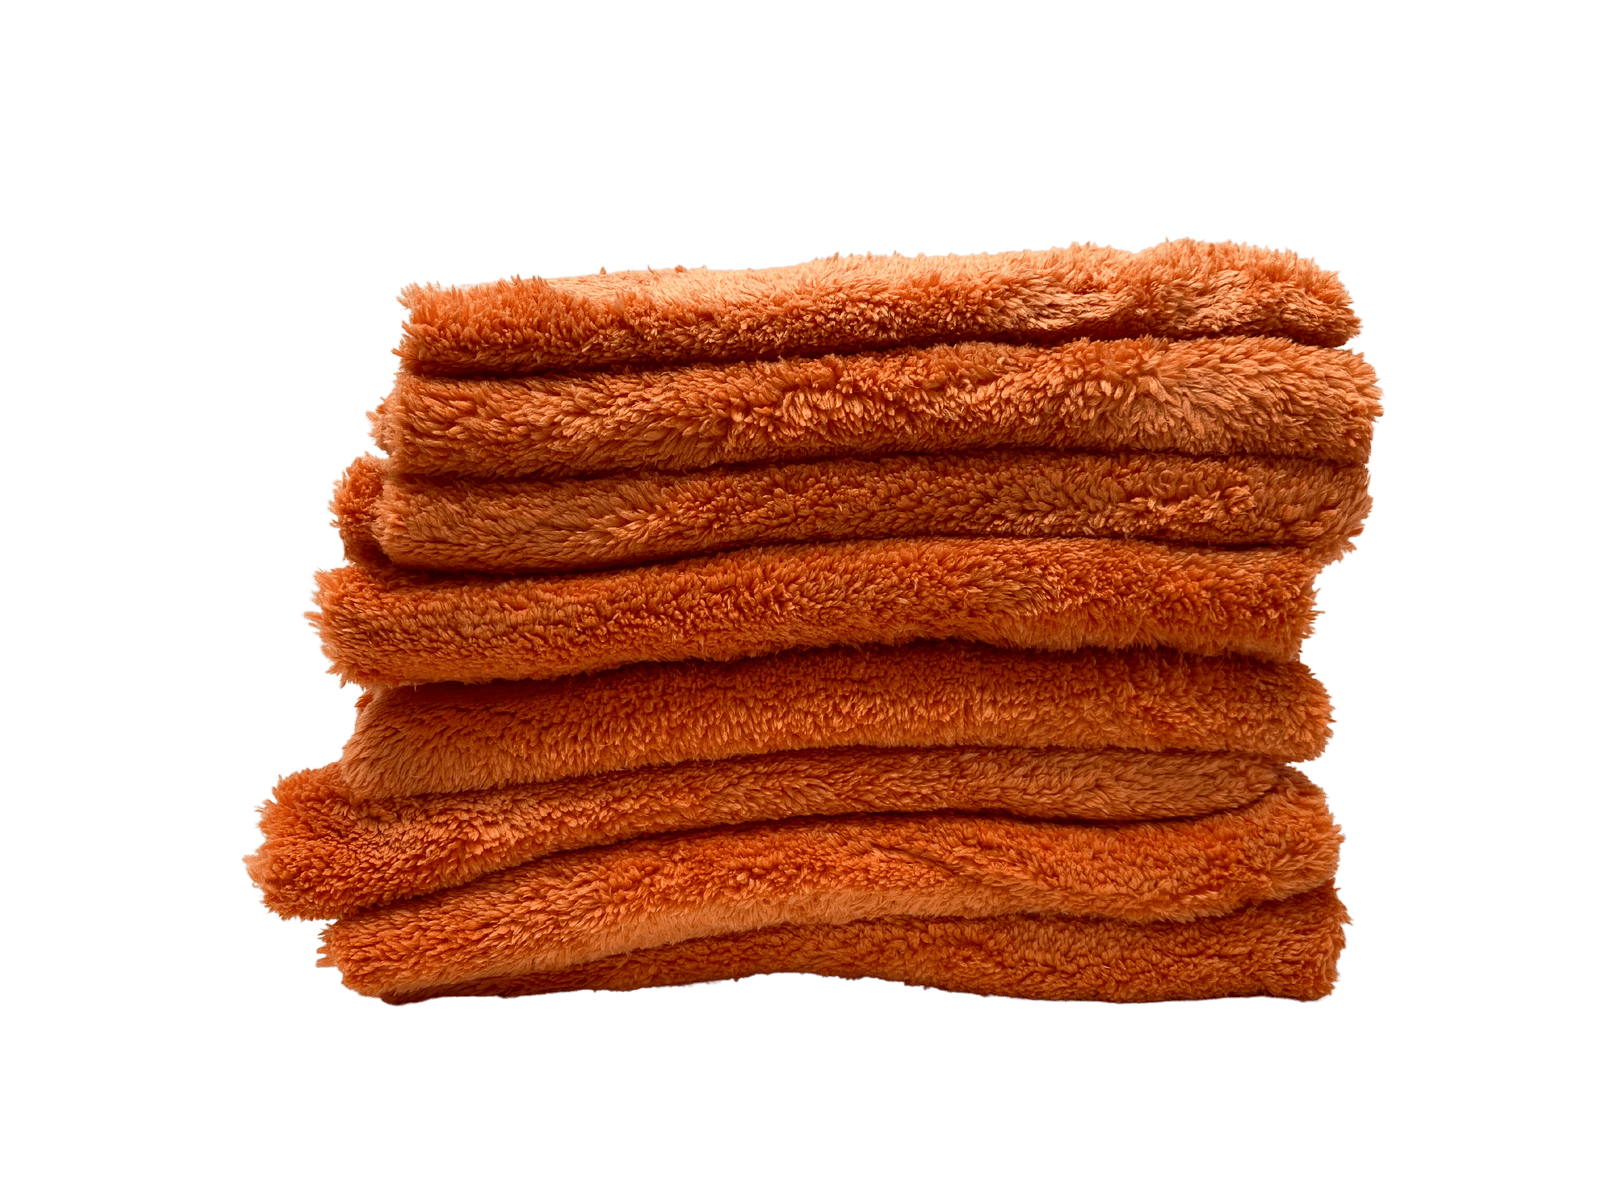 The Rag Company (4-Pack) 16 in. x 16 in. Eagle Edgeless 500 Professional Korean